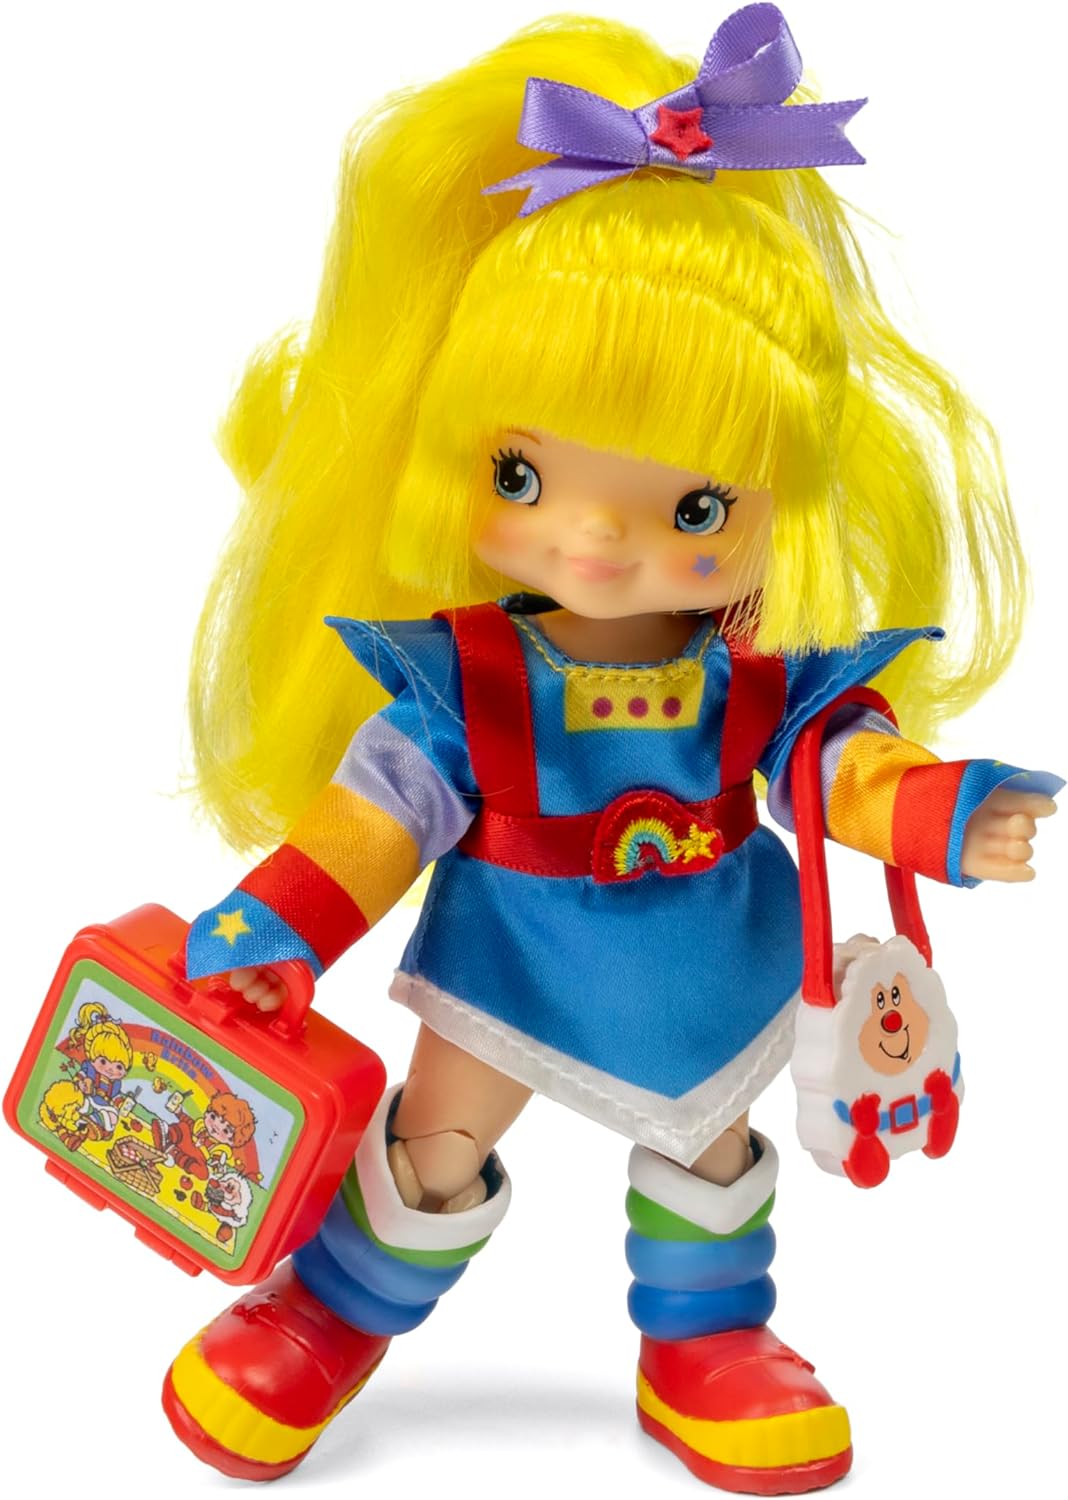 Rainbow Brite is back! New dolls shown at Sweet Suite 2023 : r/Dolls